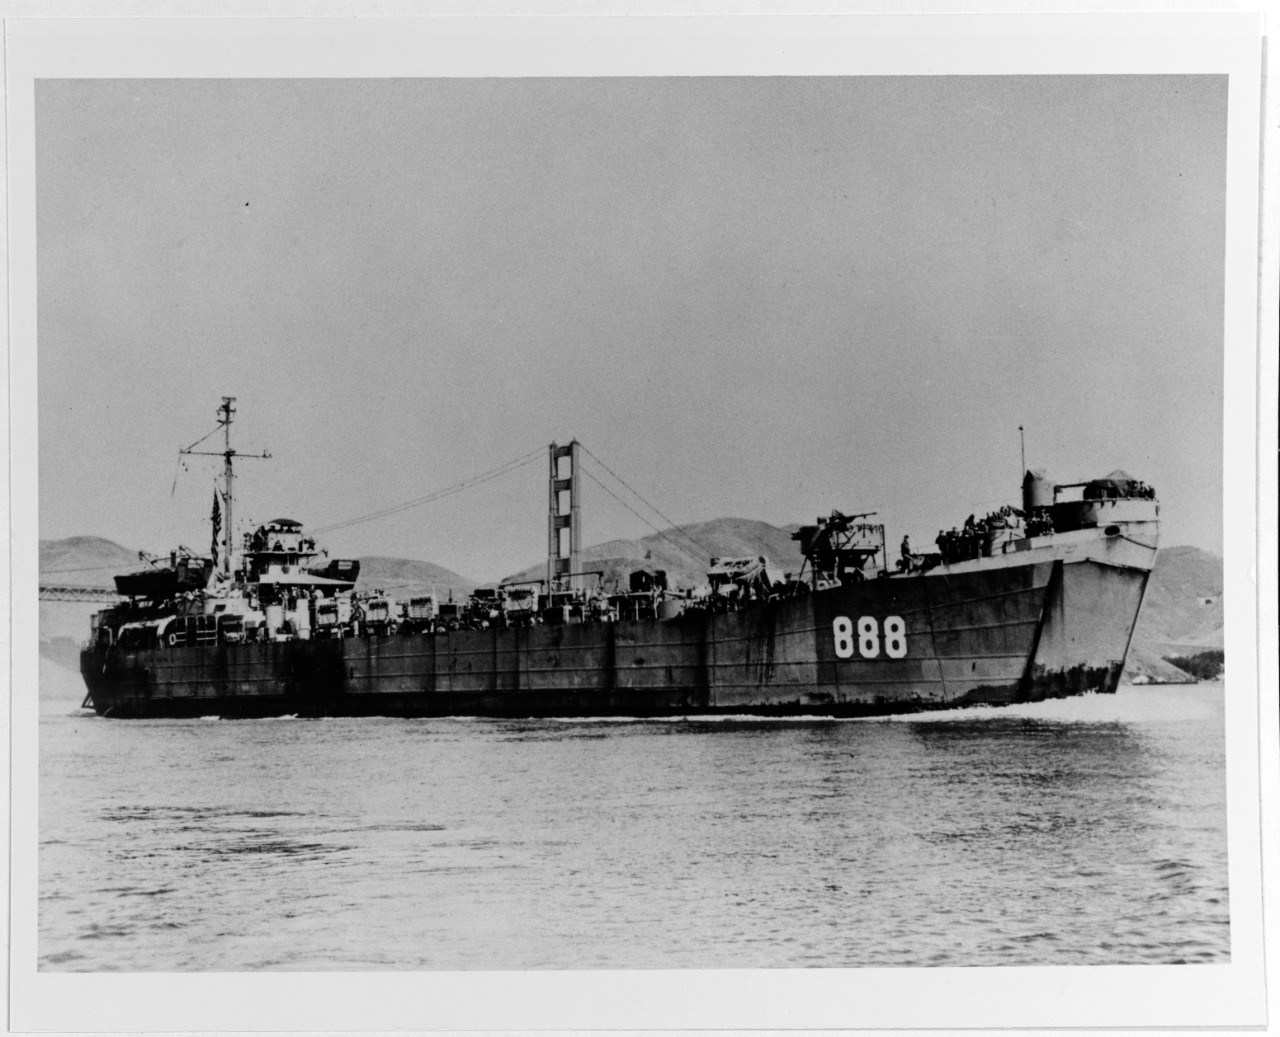 USS LST-888 (later:  LEE COUNTY)